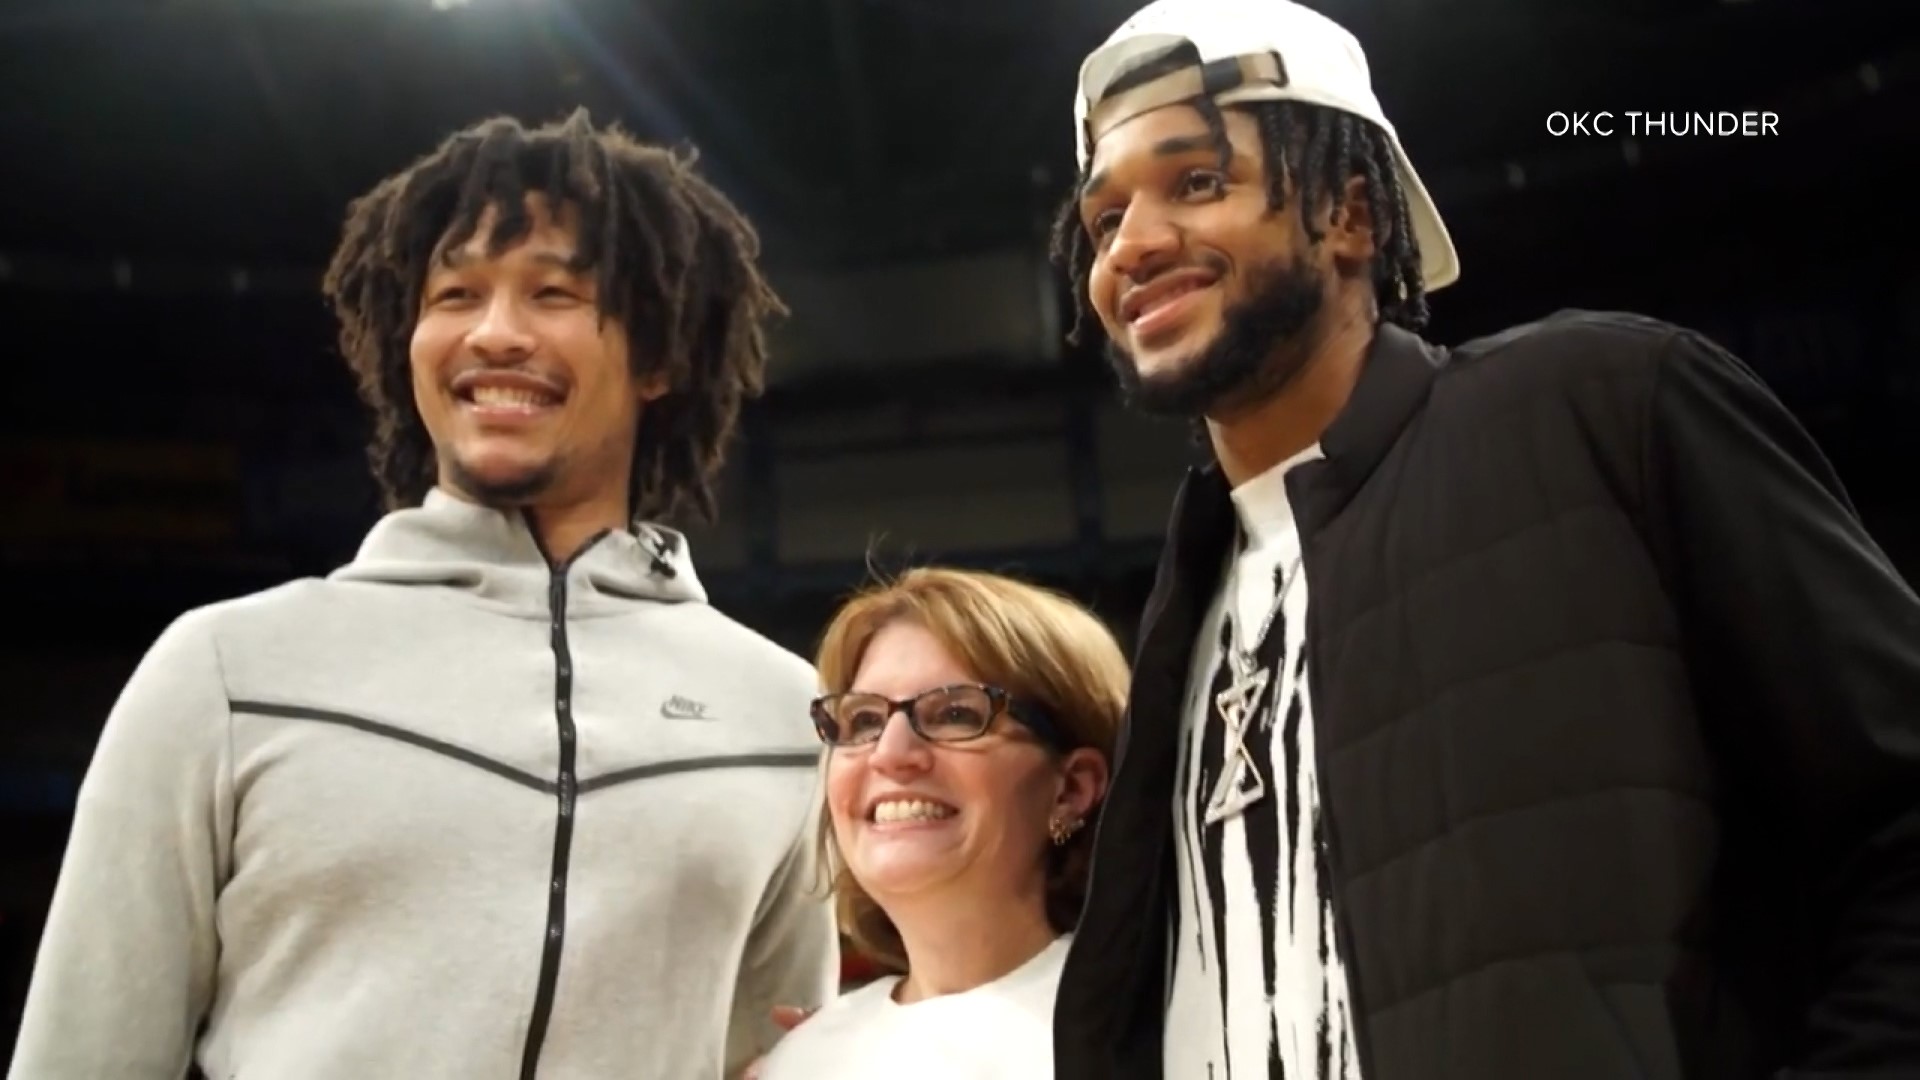 A few nights ago, Isaiah Joe and Jaylin Williams were reunited with Northside teachers and staff at a game in OKC.